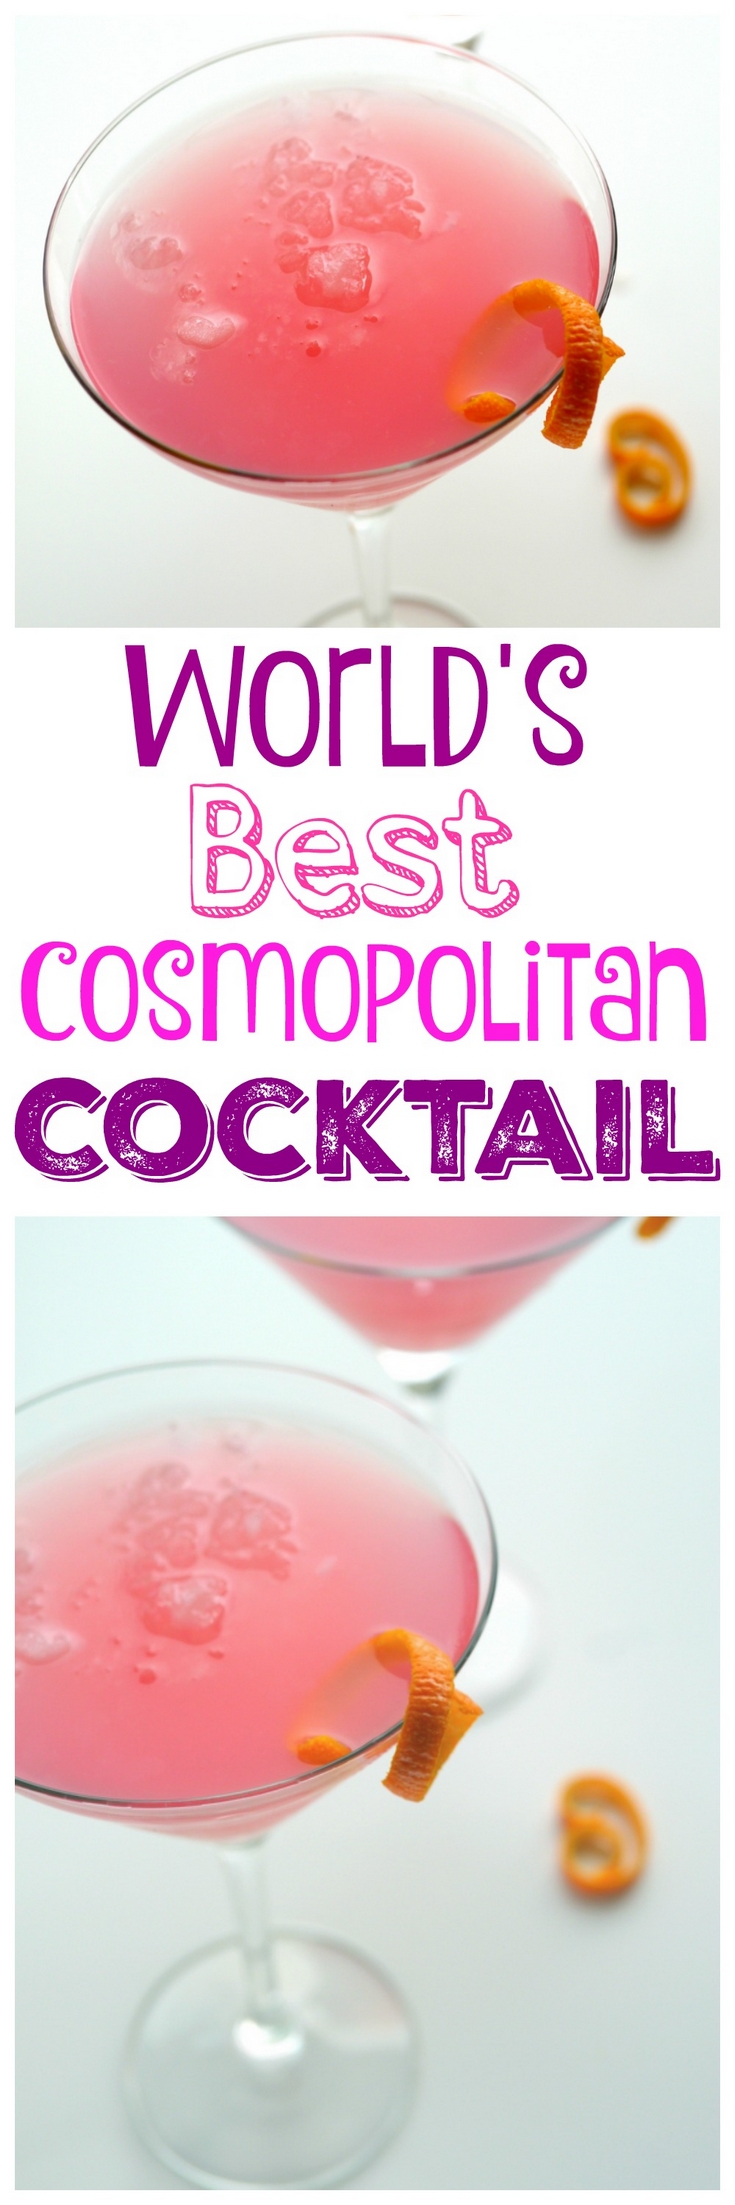 Why would you want to drink anything other than the World's Best Cosmopolitan Cocktail? The only thing girly about this cosmo drink is its color, from NoblePig.com. #cosmopolitan #cosmopolitanrecipe #cosmodrink via @cmpollak1